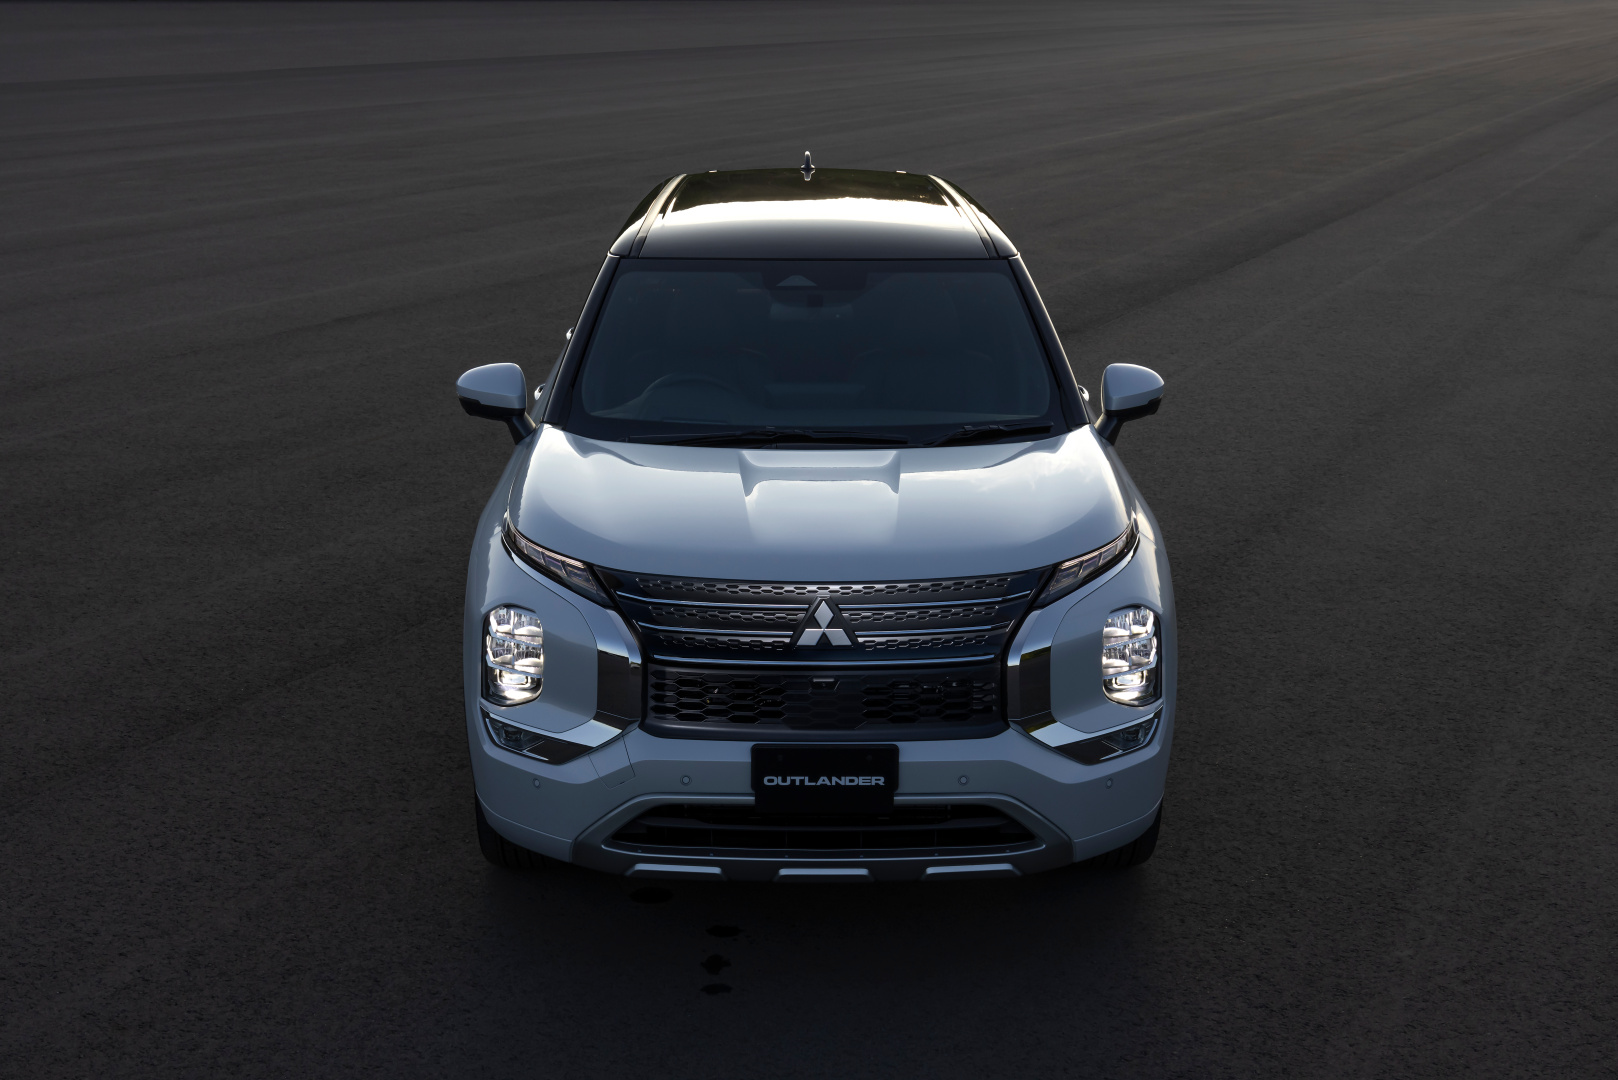 SMALL_The-all-new-outlanderPHEV_frontfacing